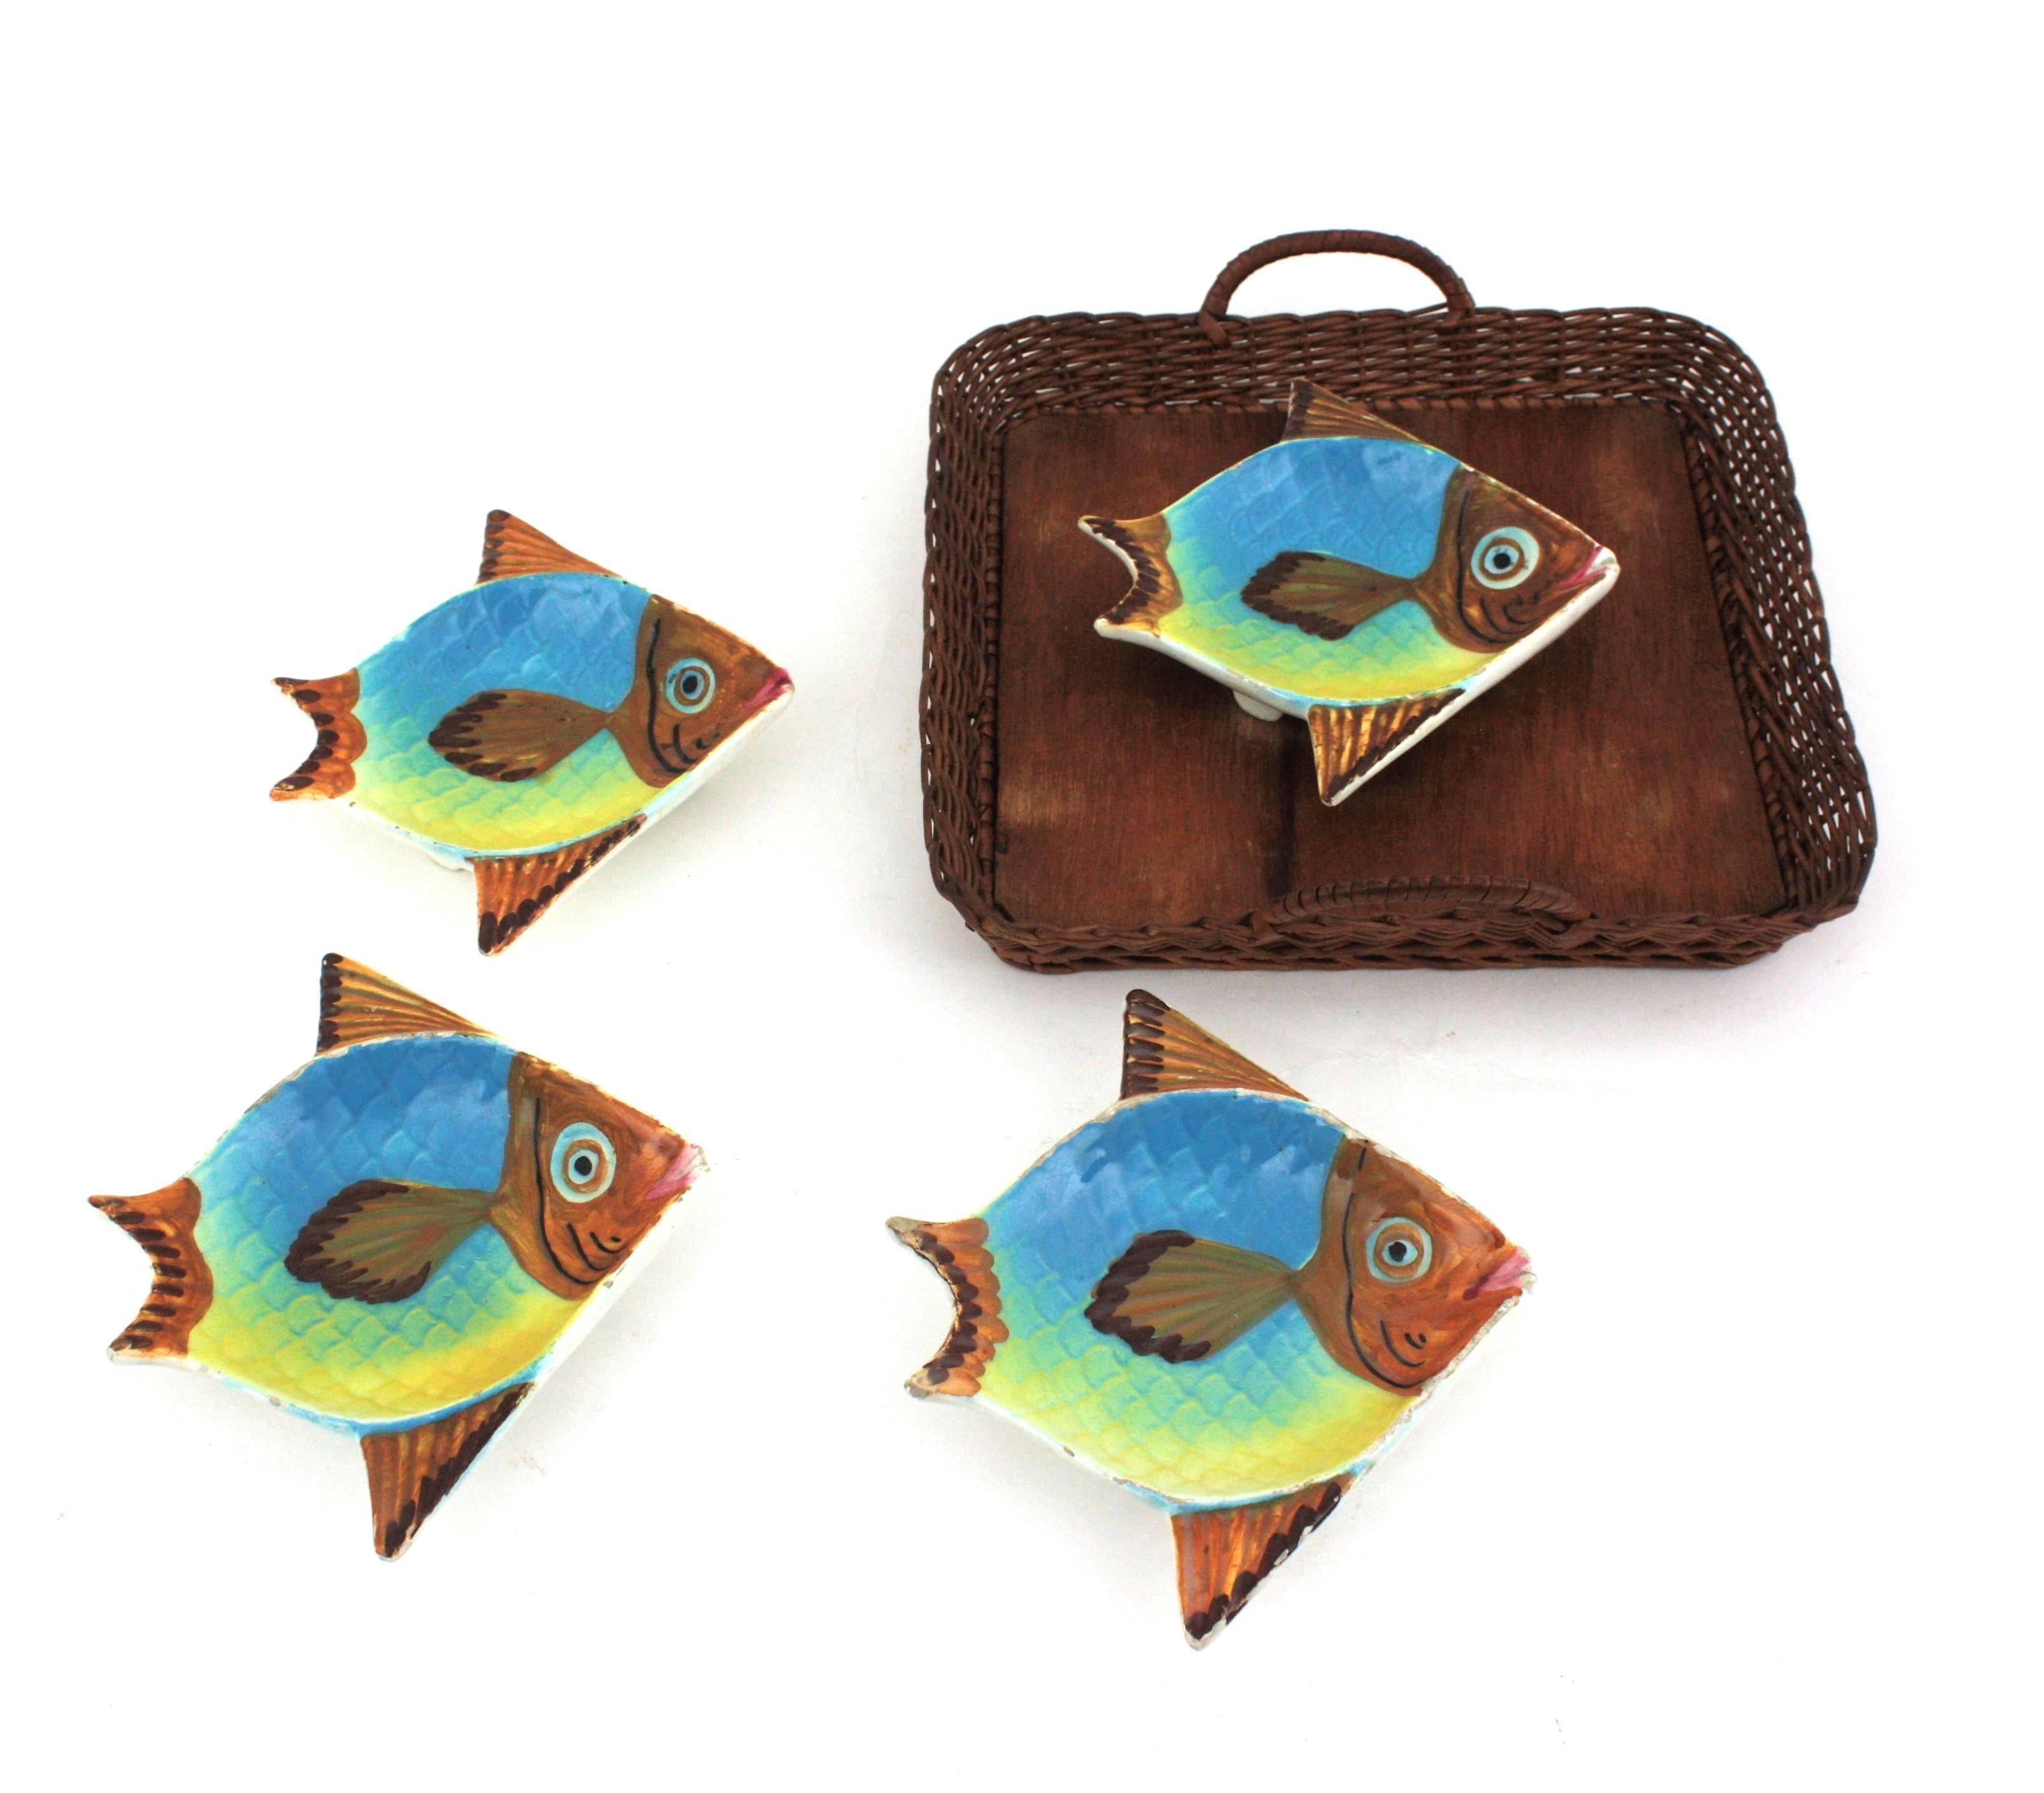 Spanish Ceramic Fish Bowls and Rattan Tray Snacks Set For Sale 2